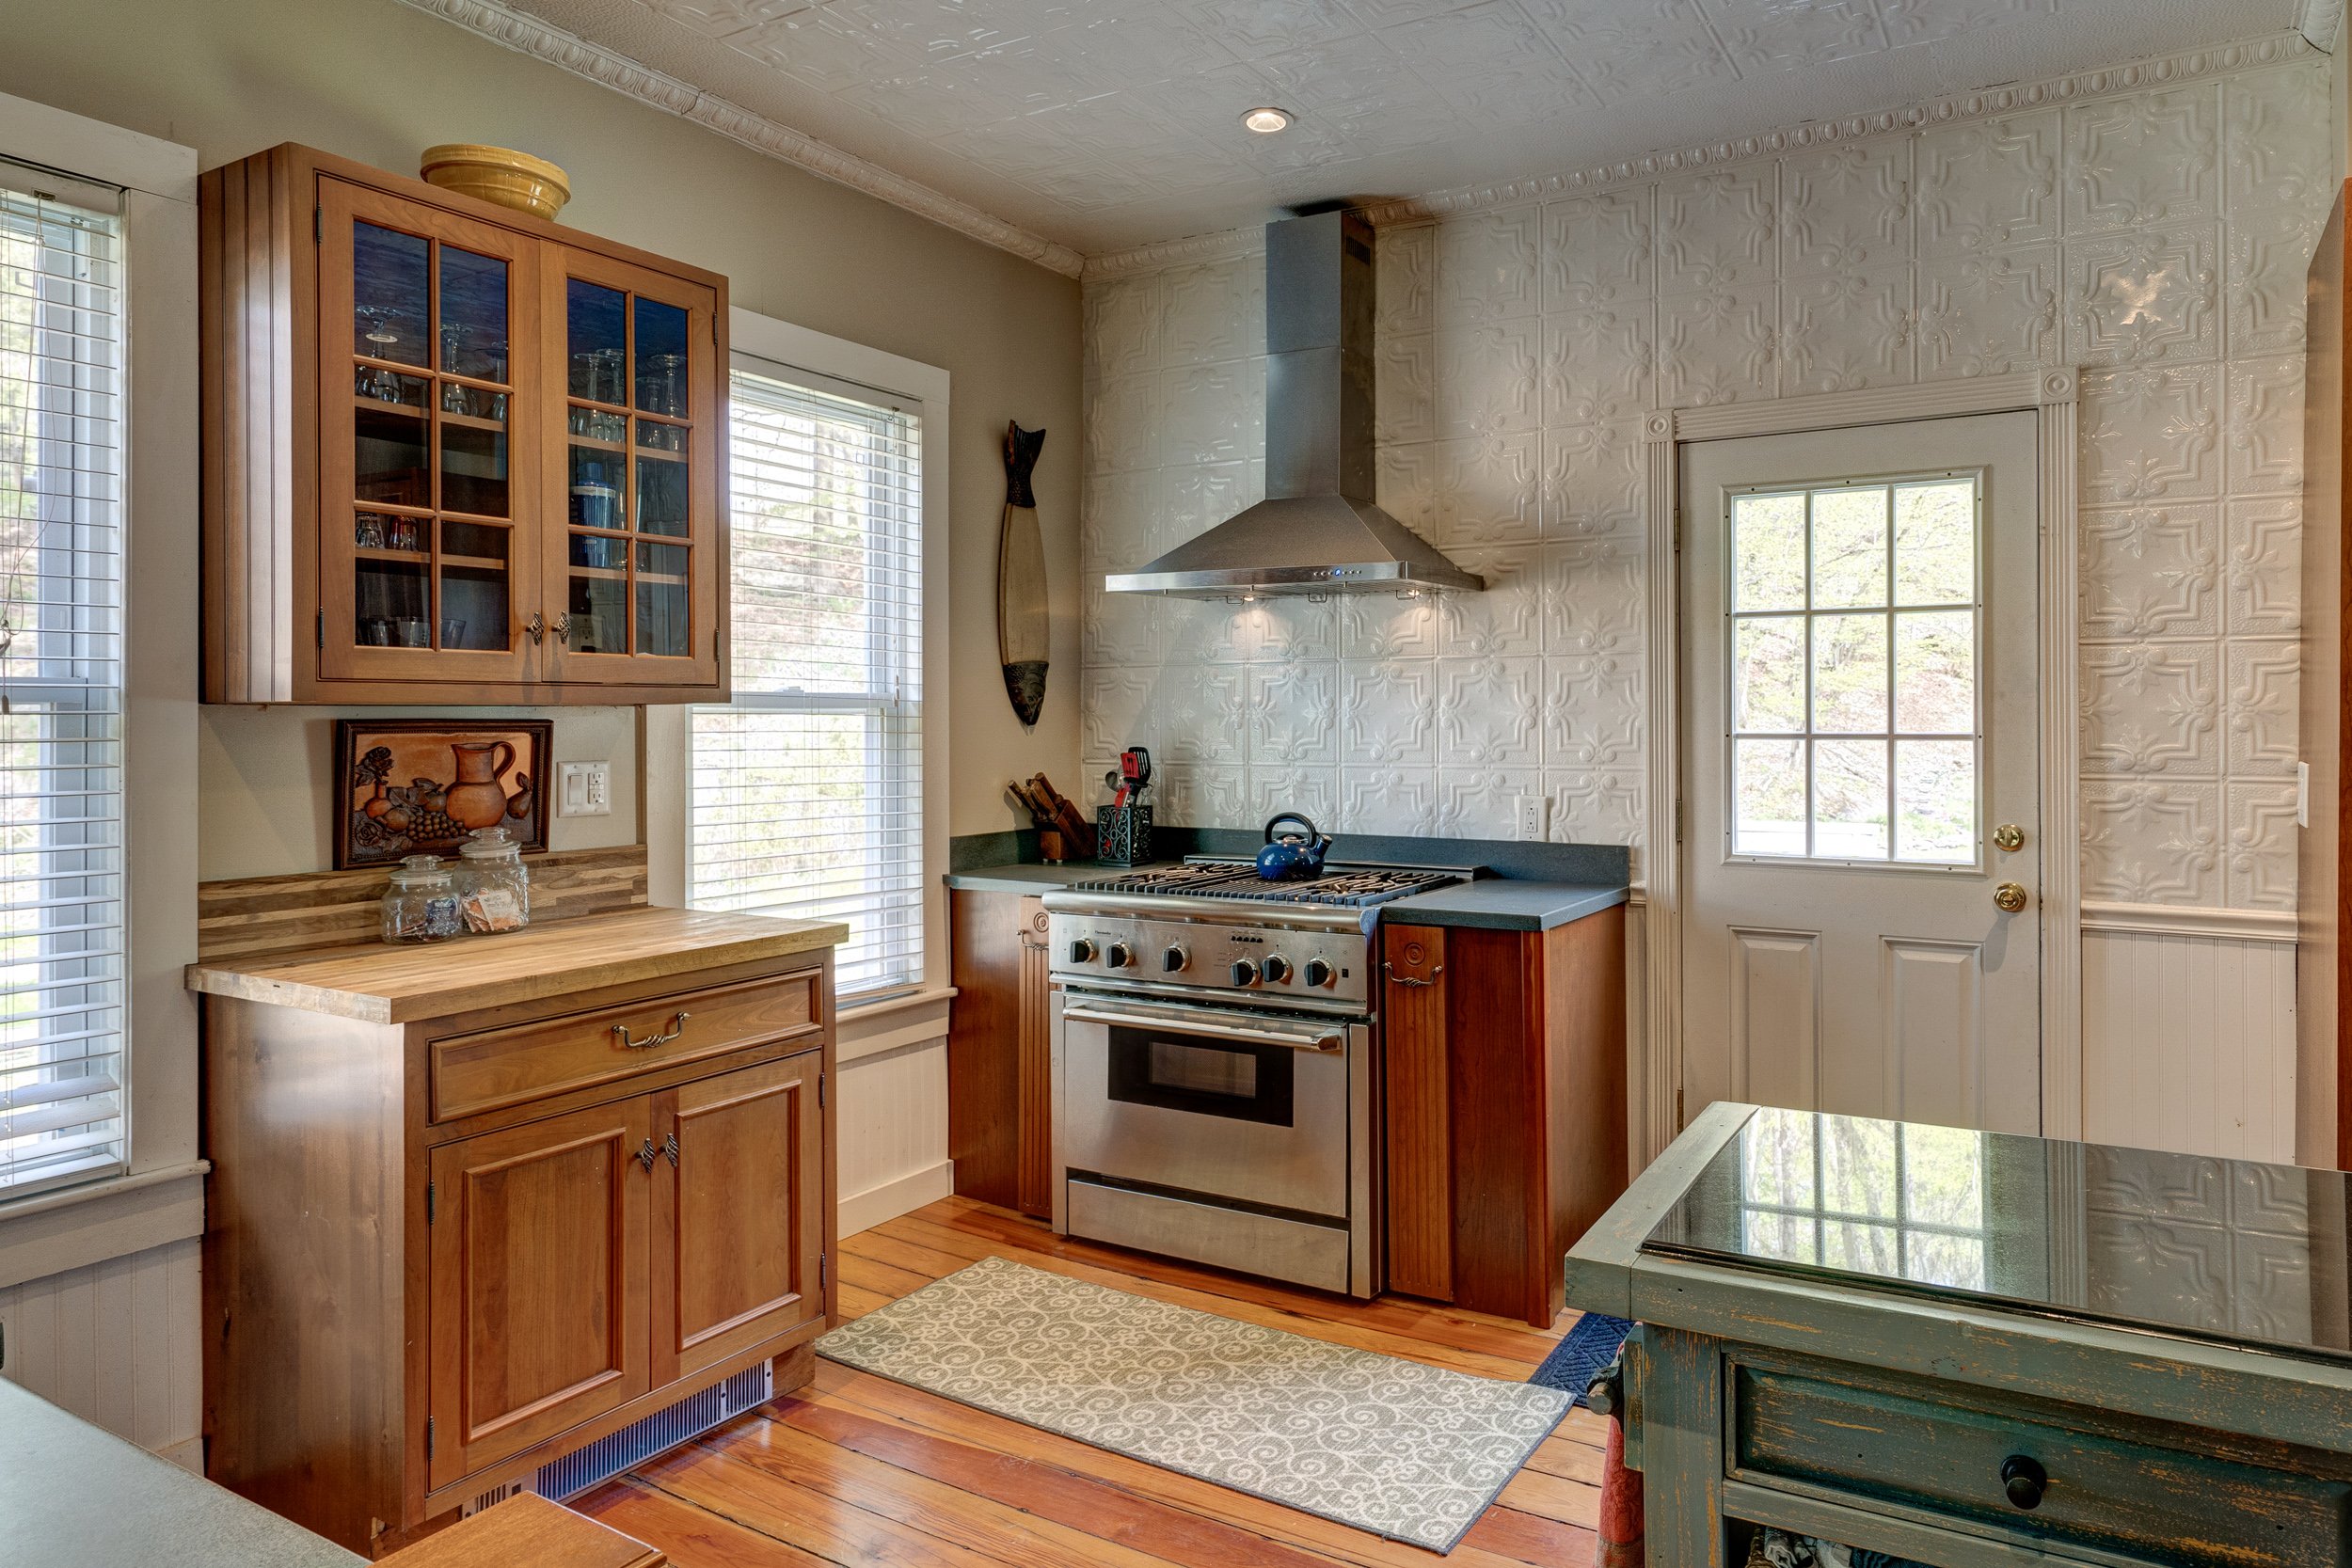 Roscoe house for sale kitchen